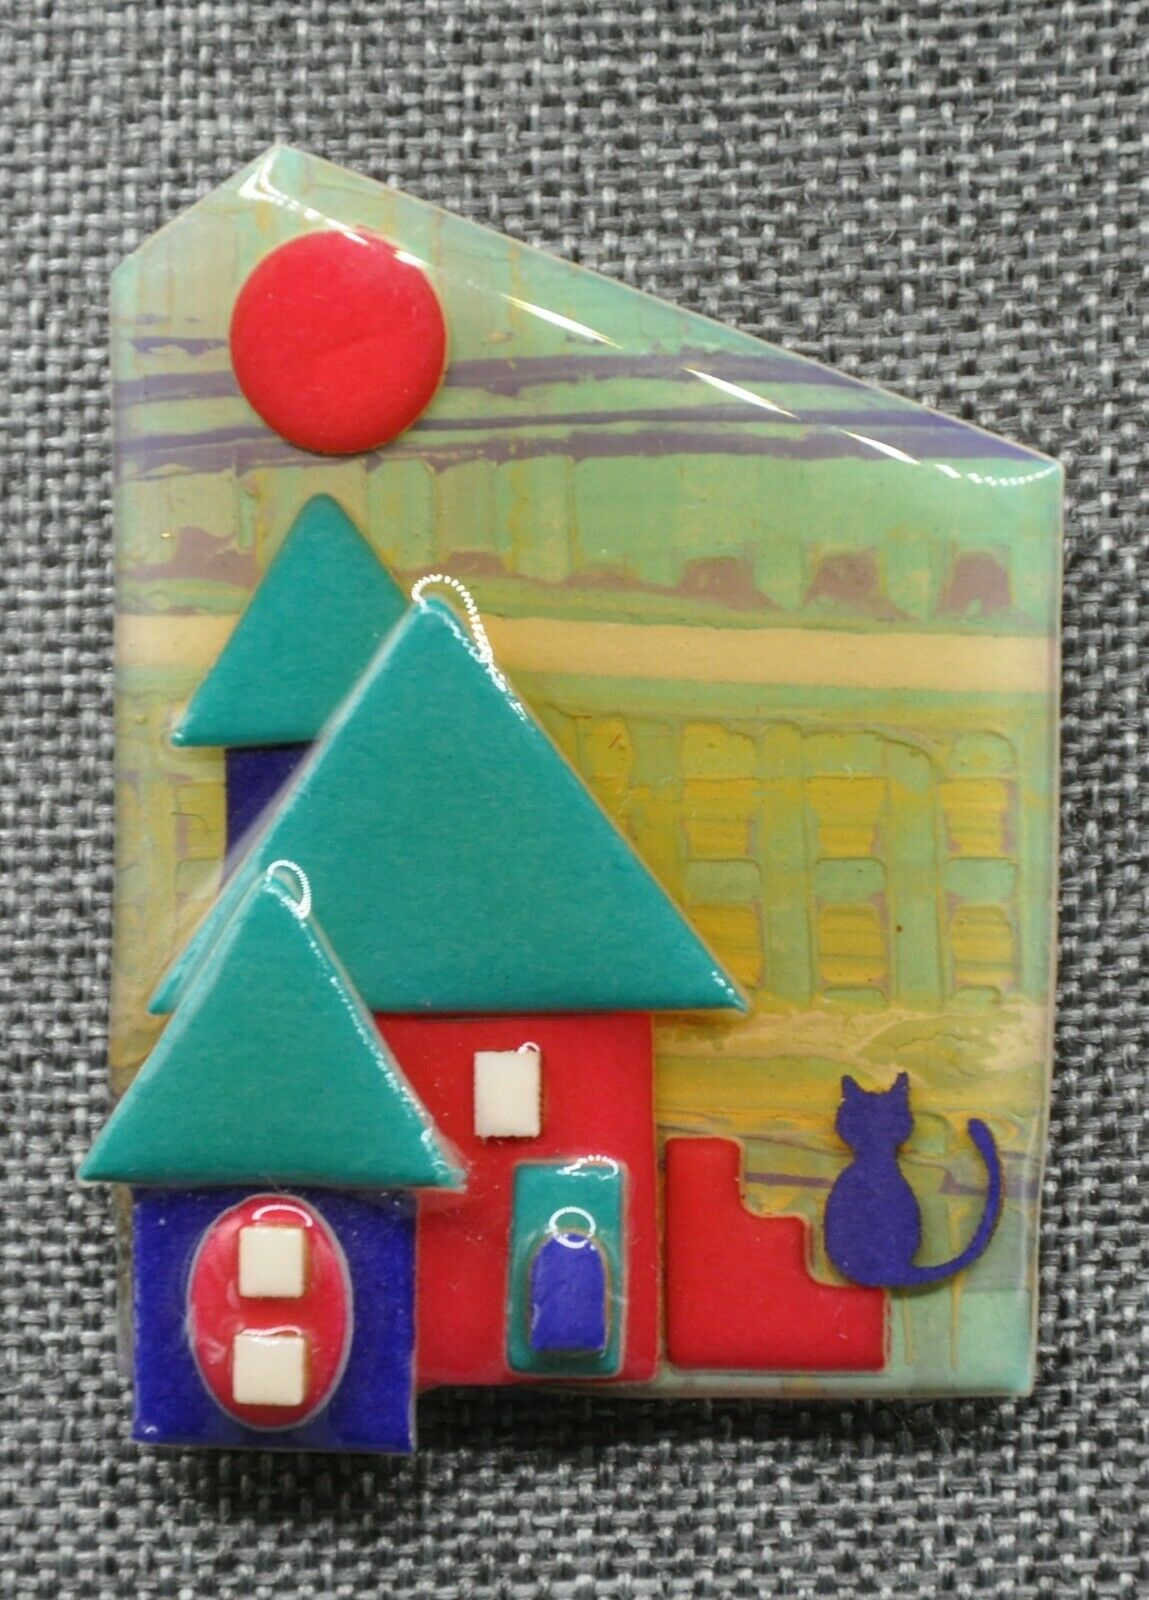 House Pins By Lucinda 1 Pin Designed With Homes, Cat, Red Sun